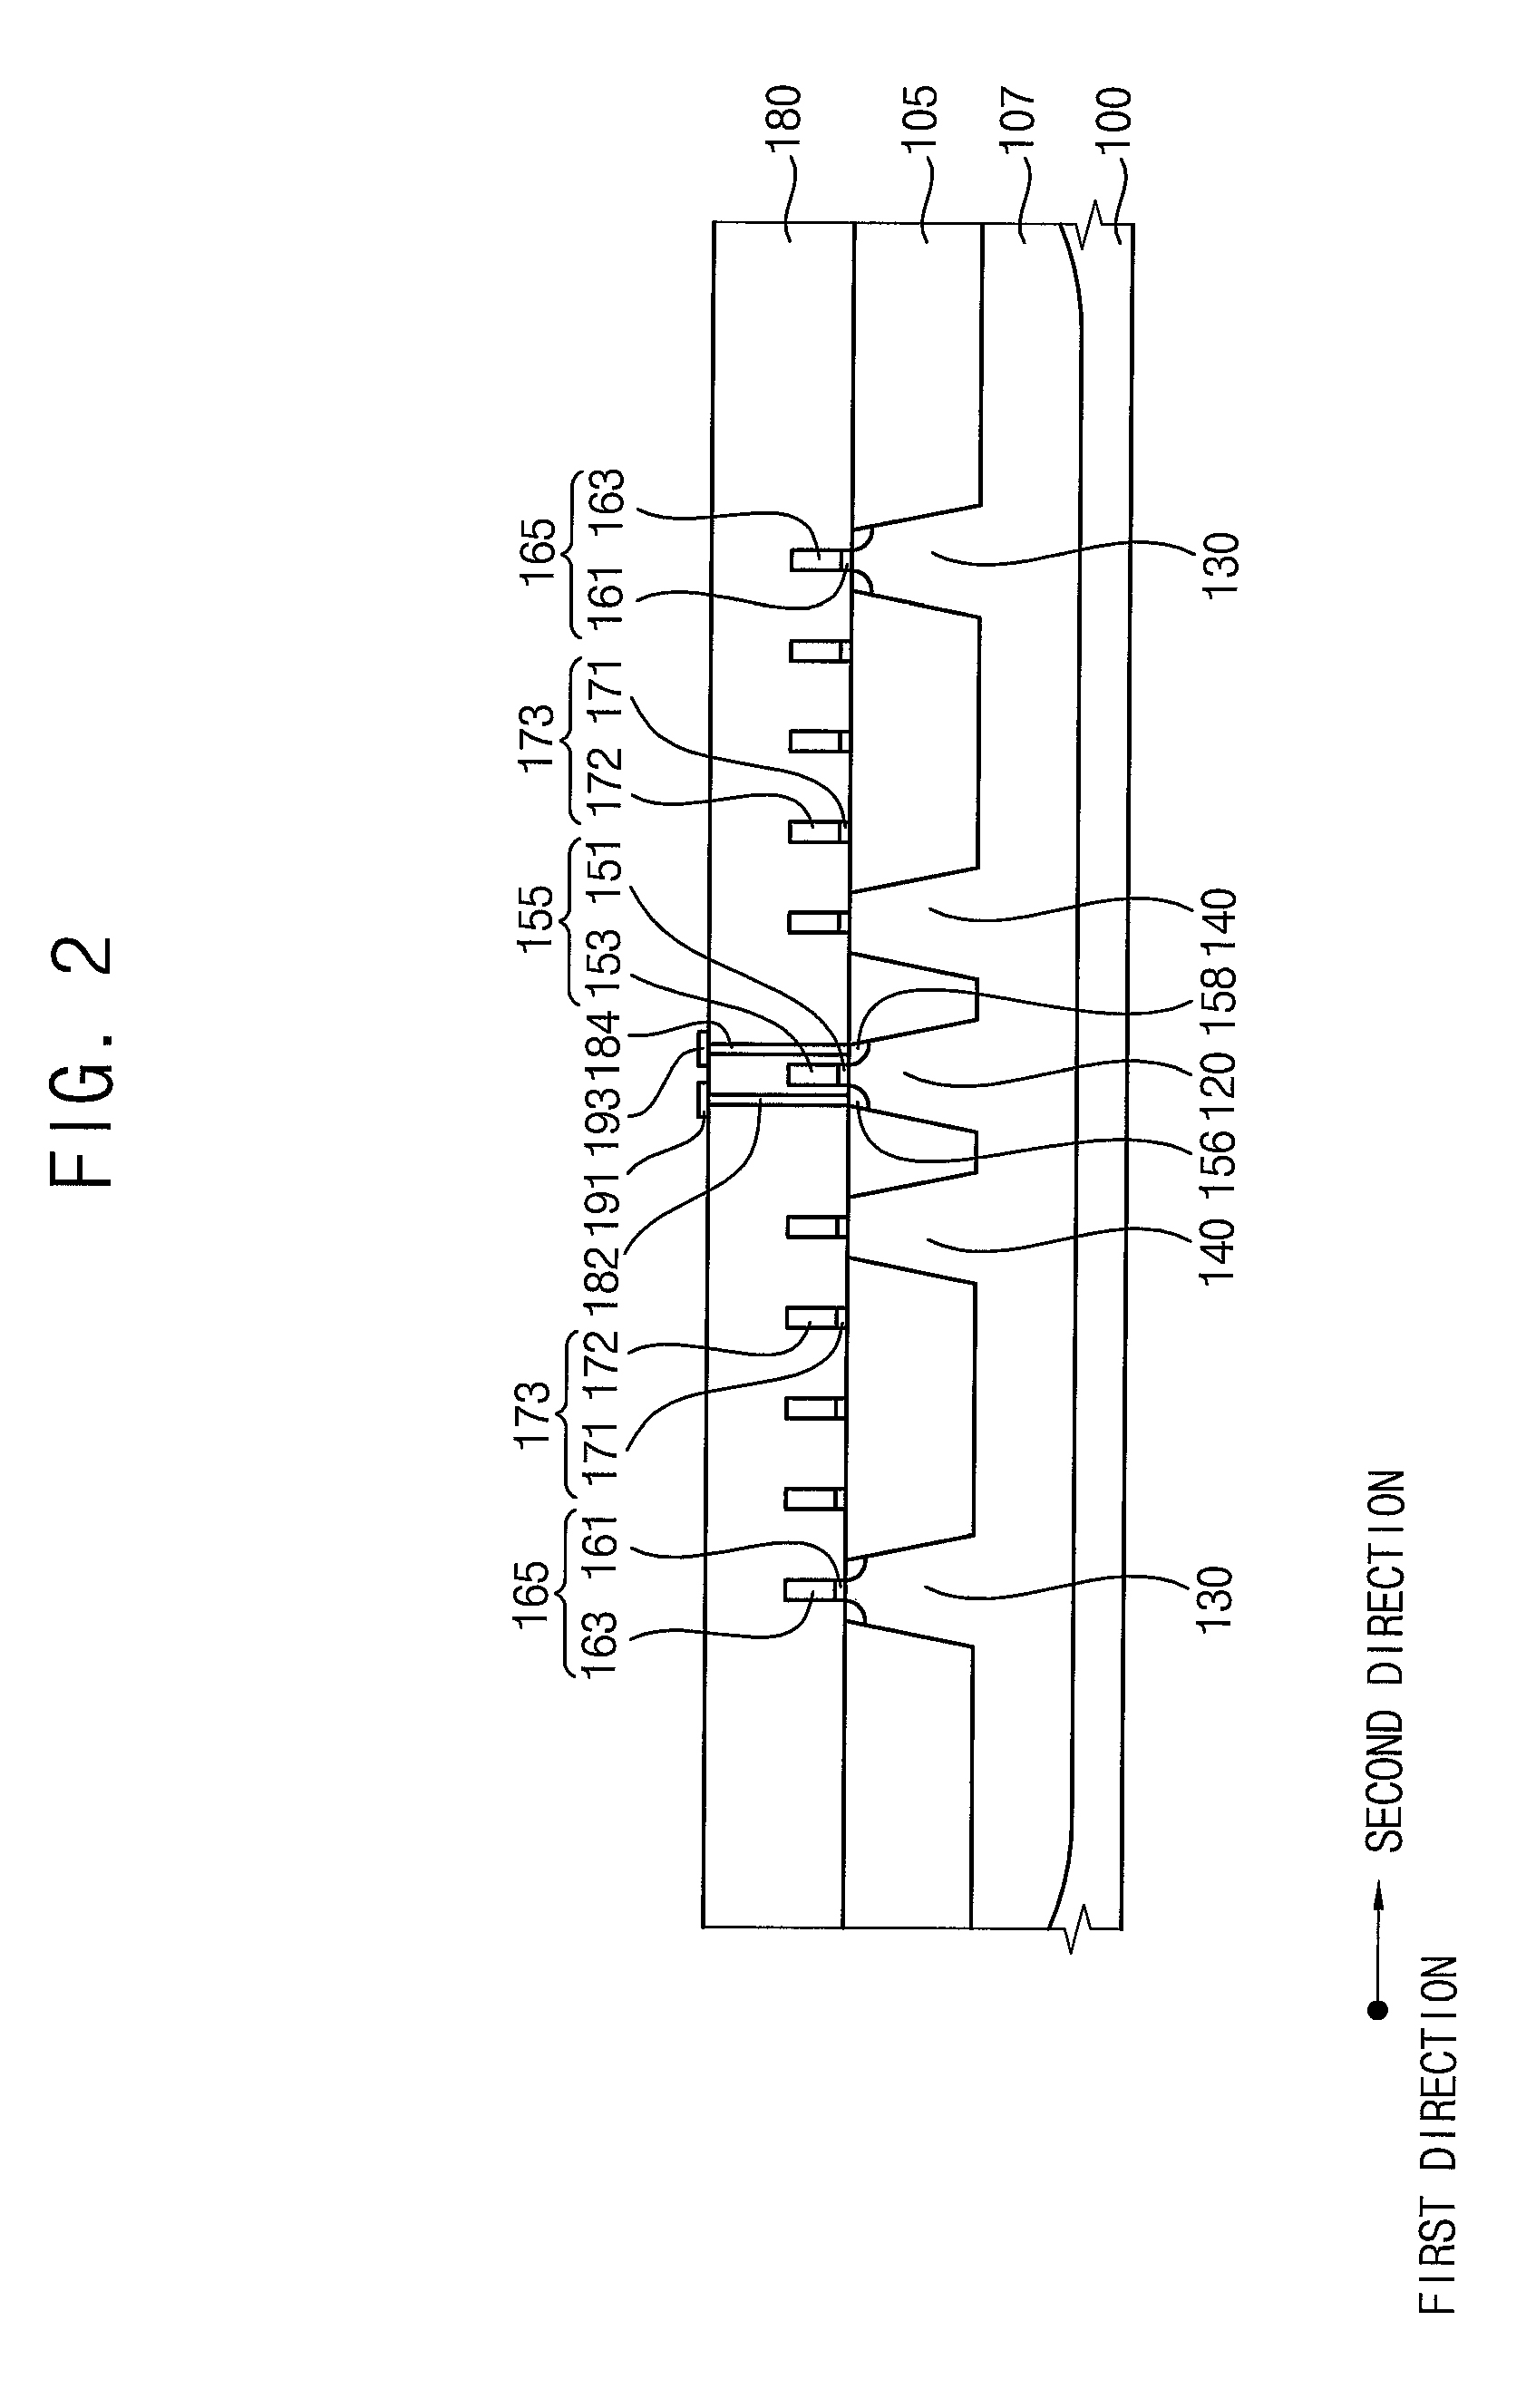 Test structure of a semiconductor device and semiconductor device